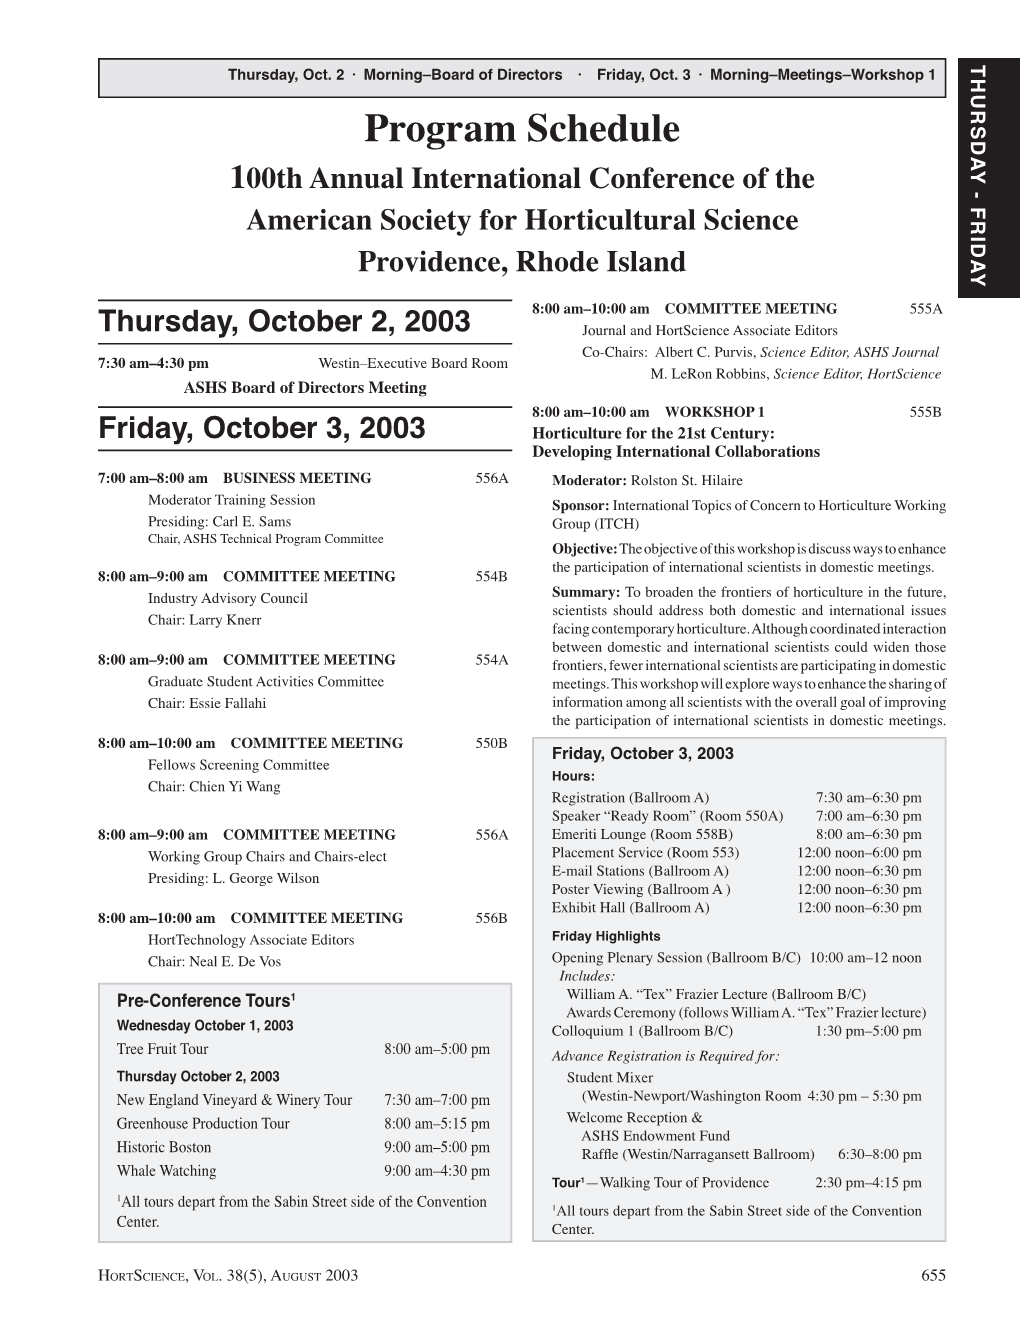 Program Schedule 100Th Annual International Conference of the American Society for Horticultural Science Providence, Rhode Island